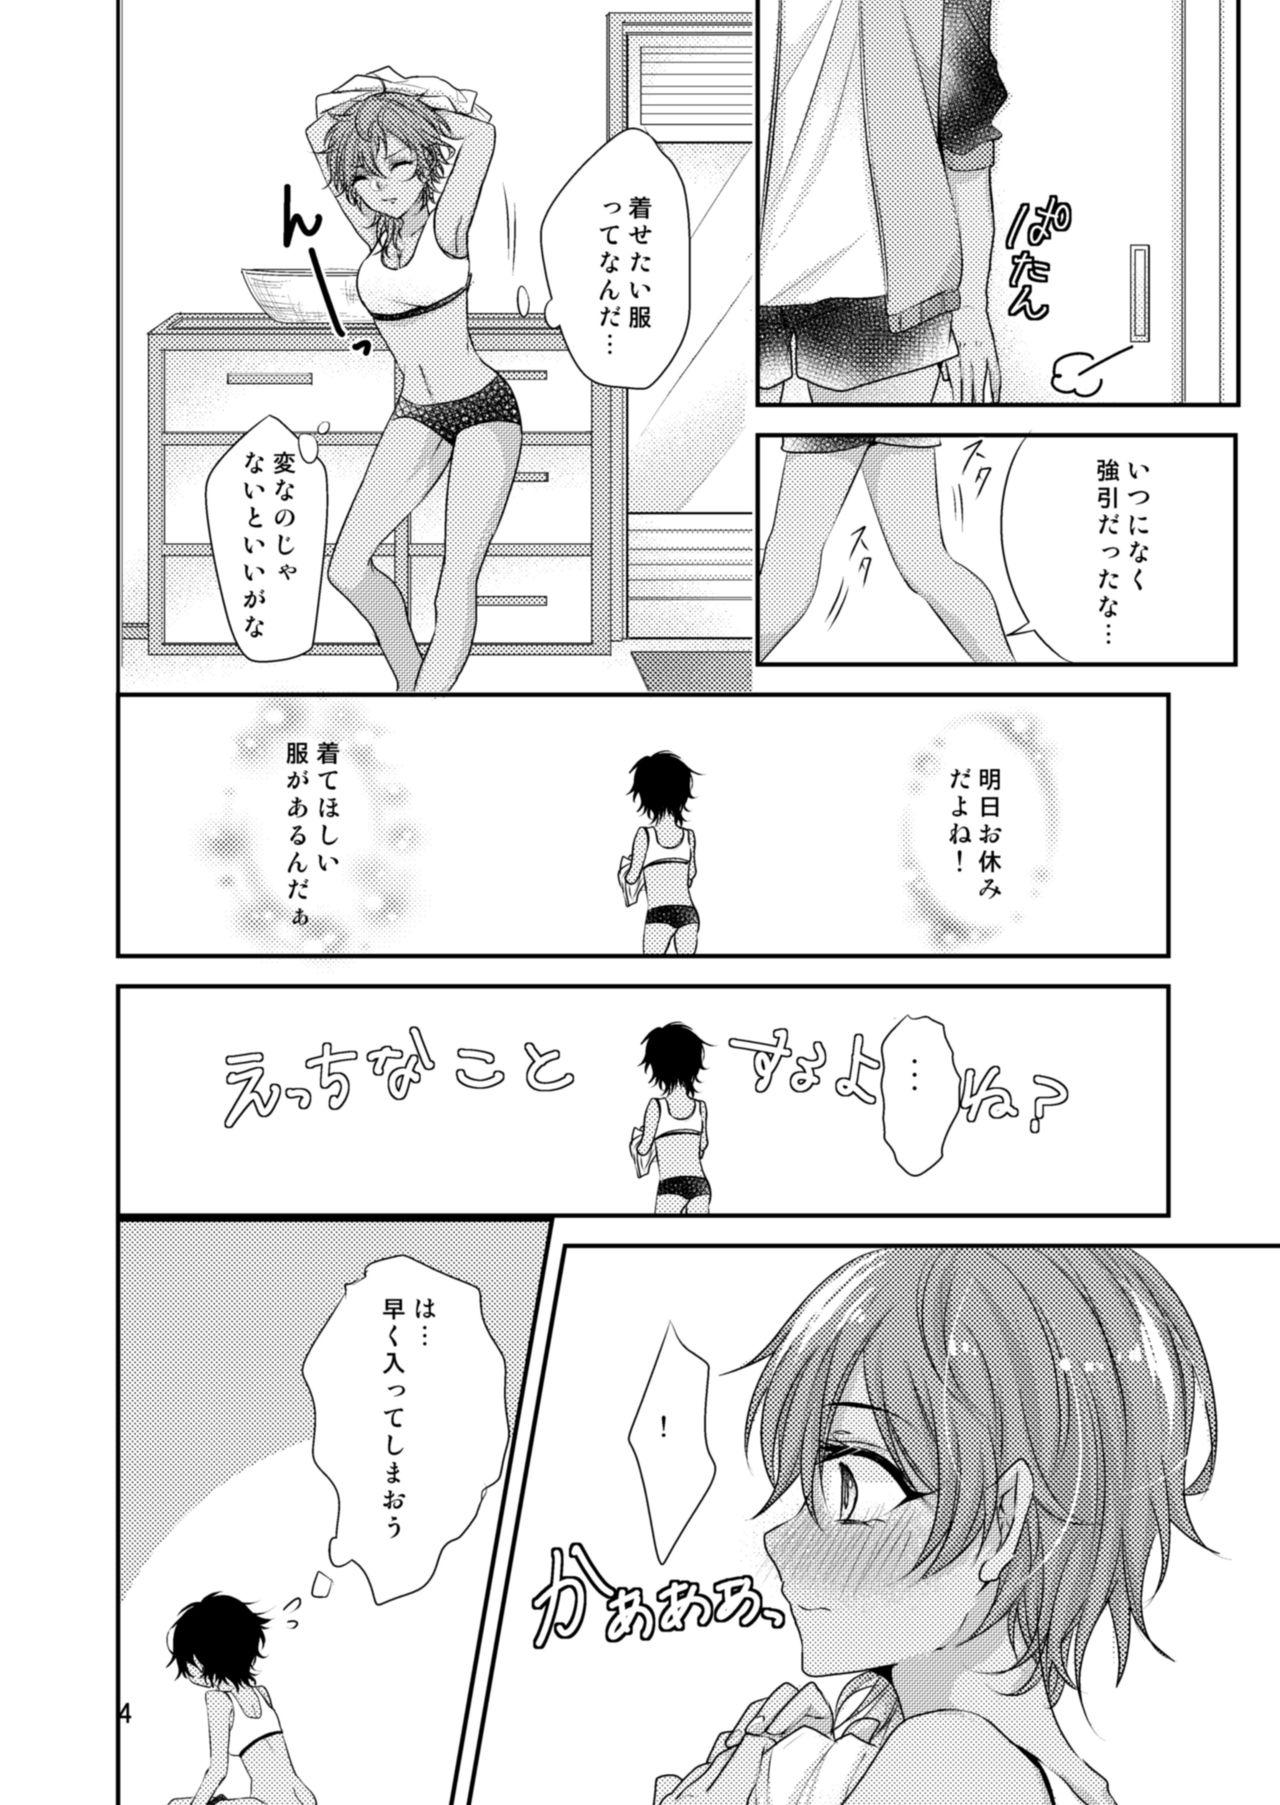 Her Suite Happiness - Touken ranbu Ex Gf - Page 5